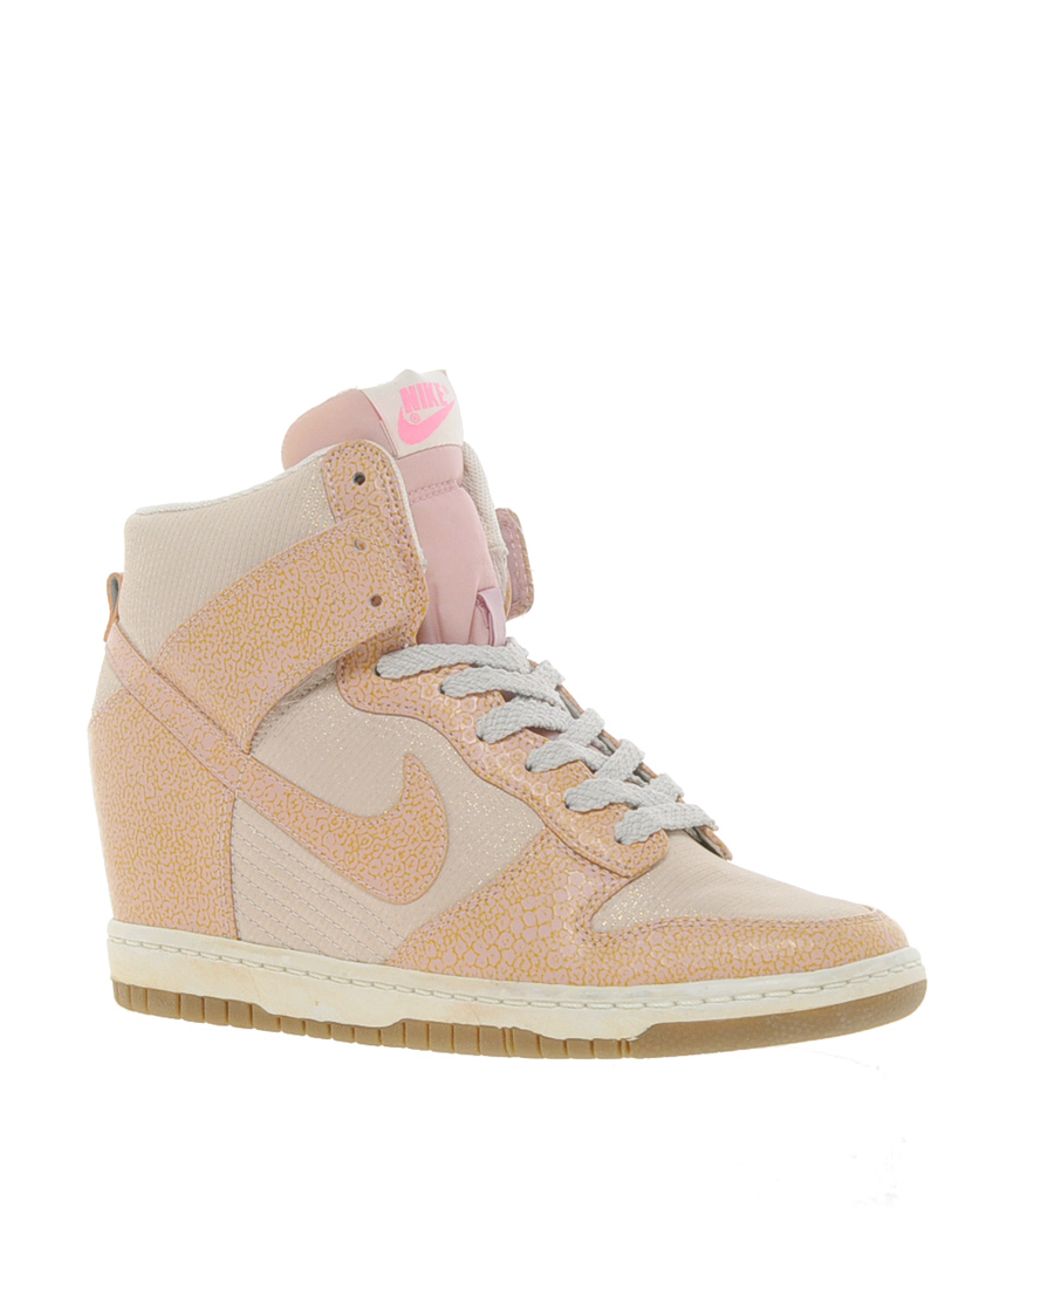 Nike Dunk Sky High Top Pink Wedge Trainers | Lyst Canada